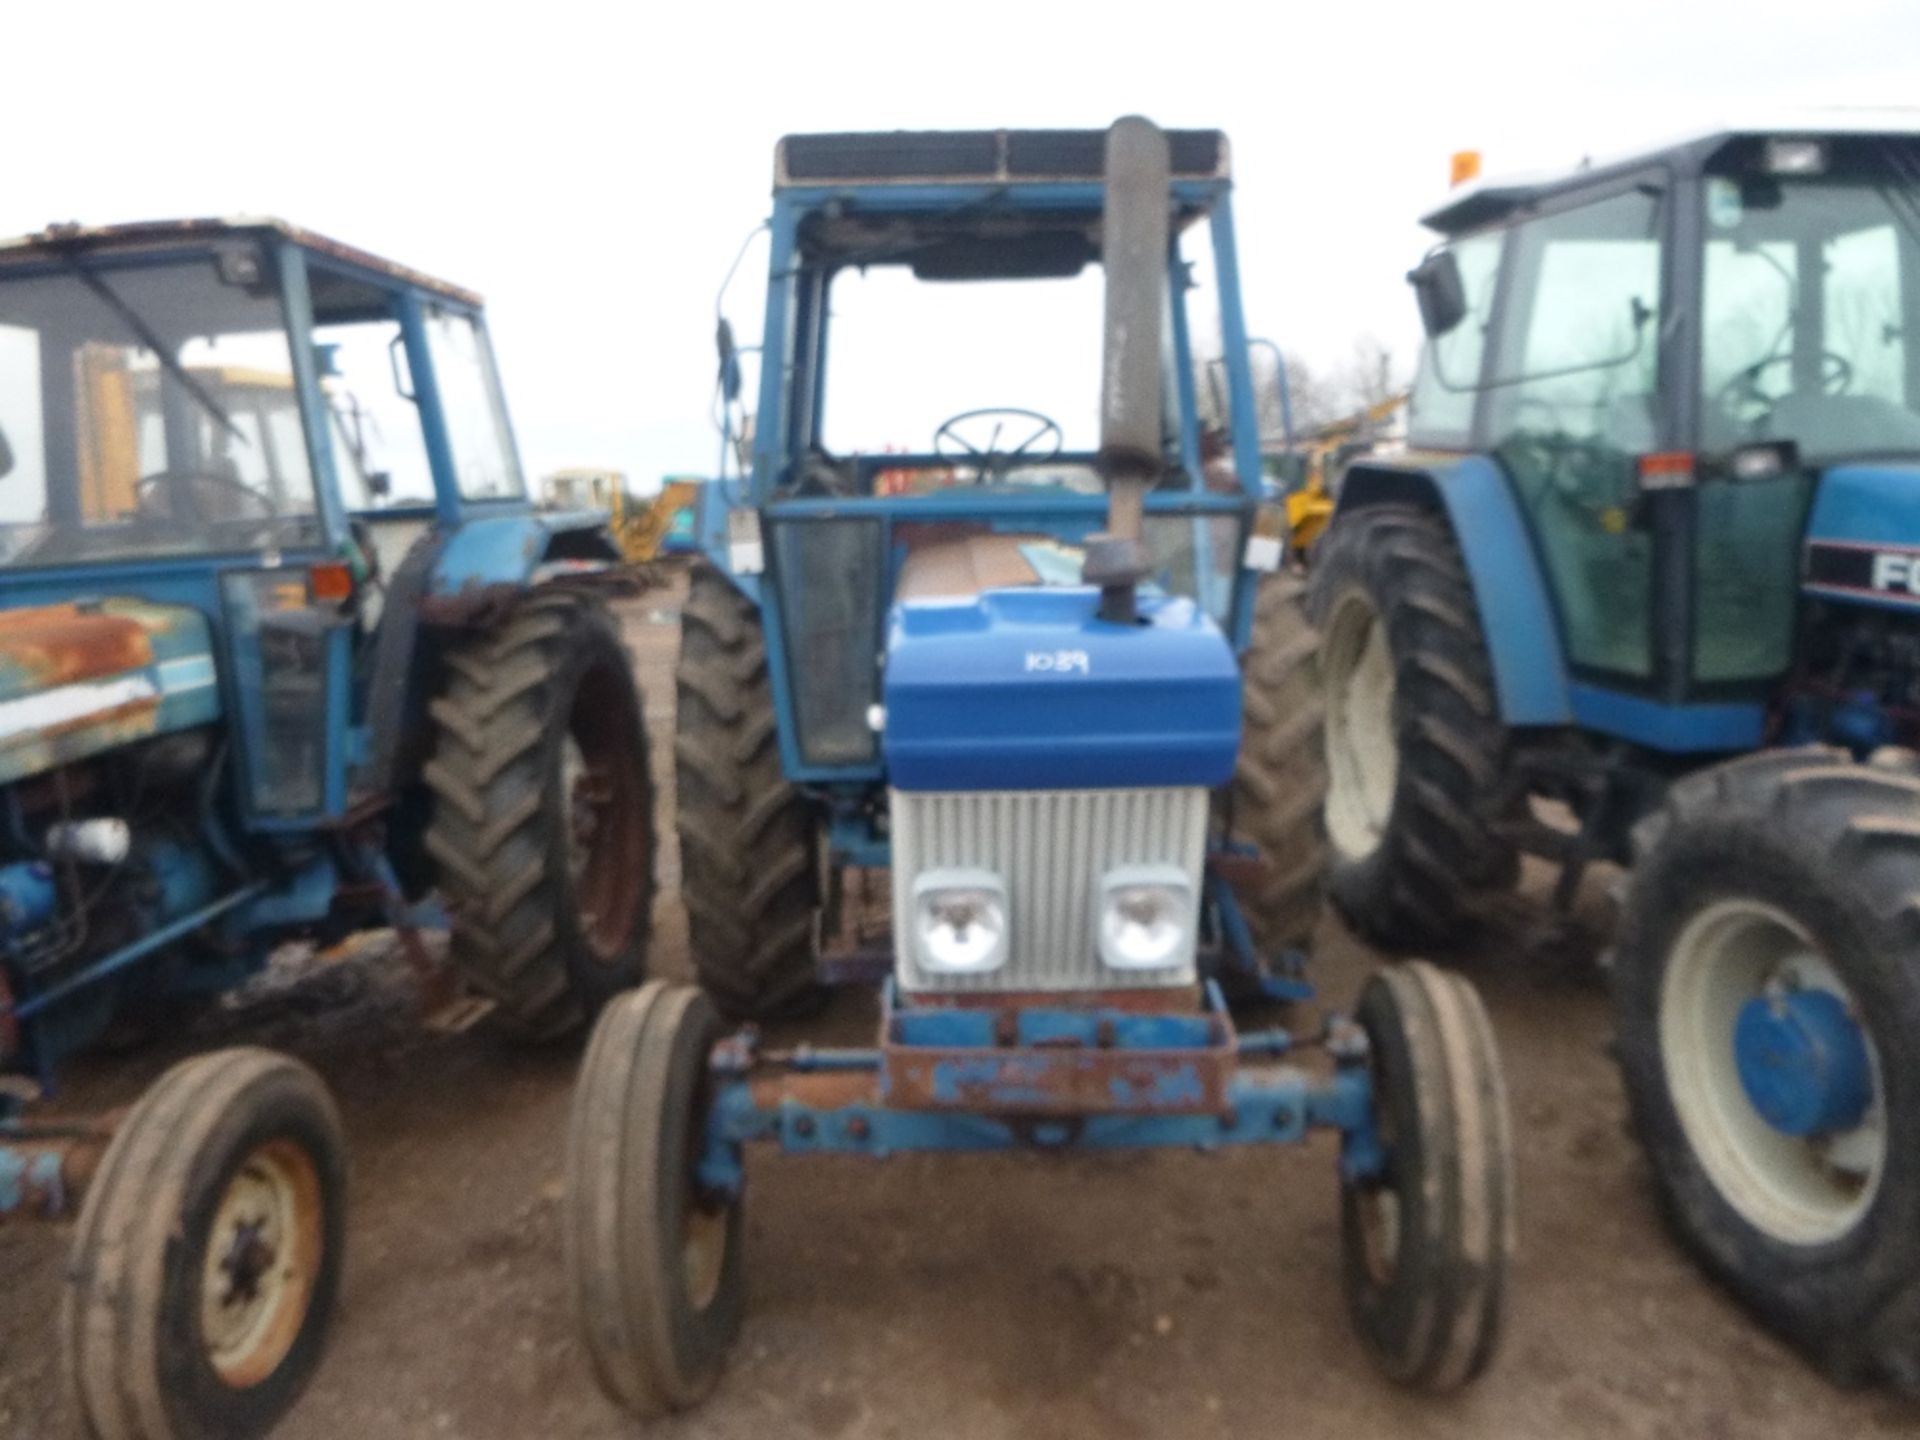 Ford 5610 2wd Tractor with Floor Change Gearbox. Reg. No. B621 UOW Ser. No. BA22021 - Image 2 of 13